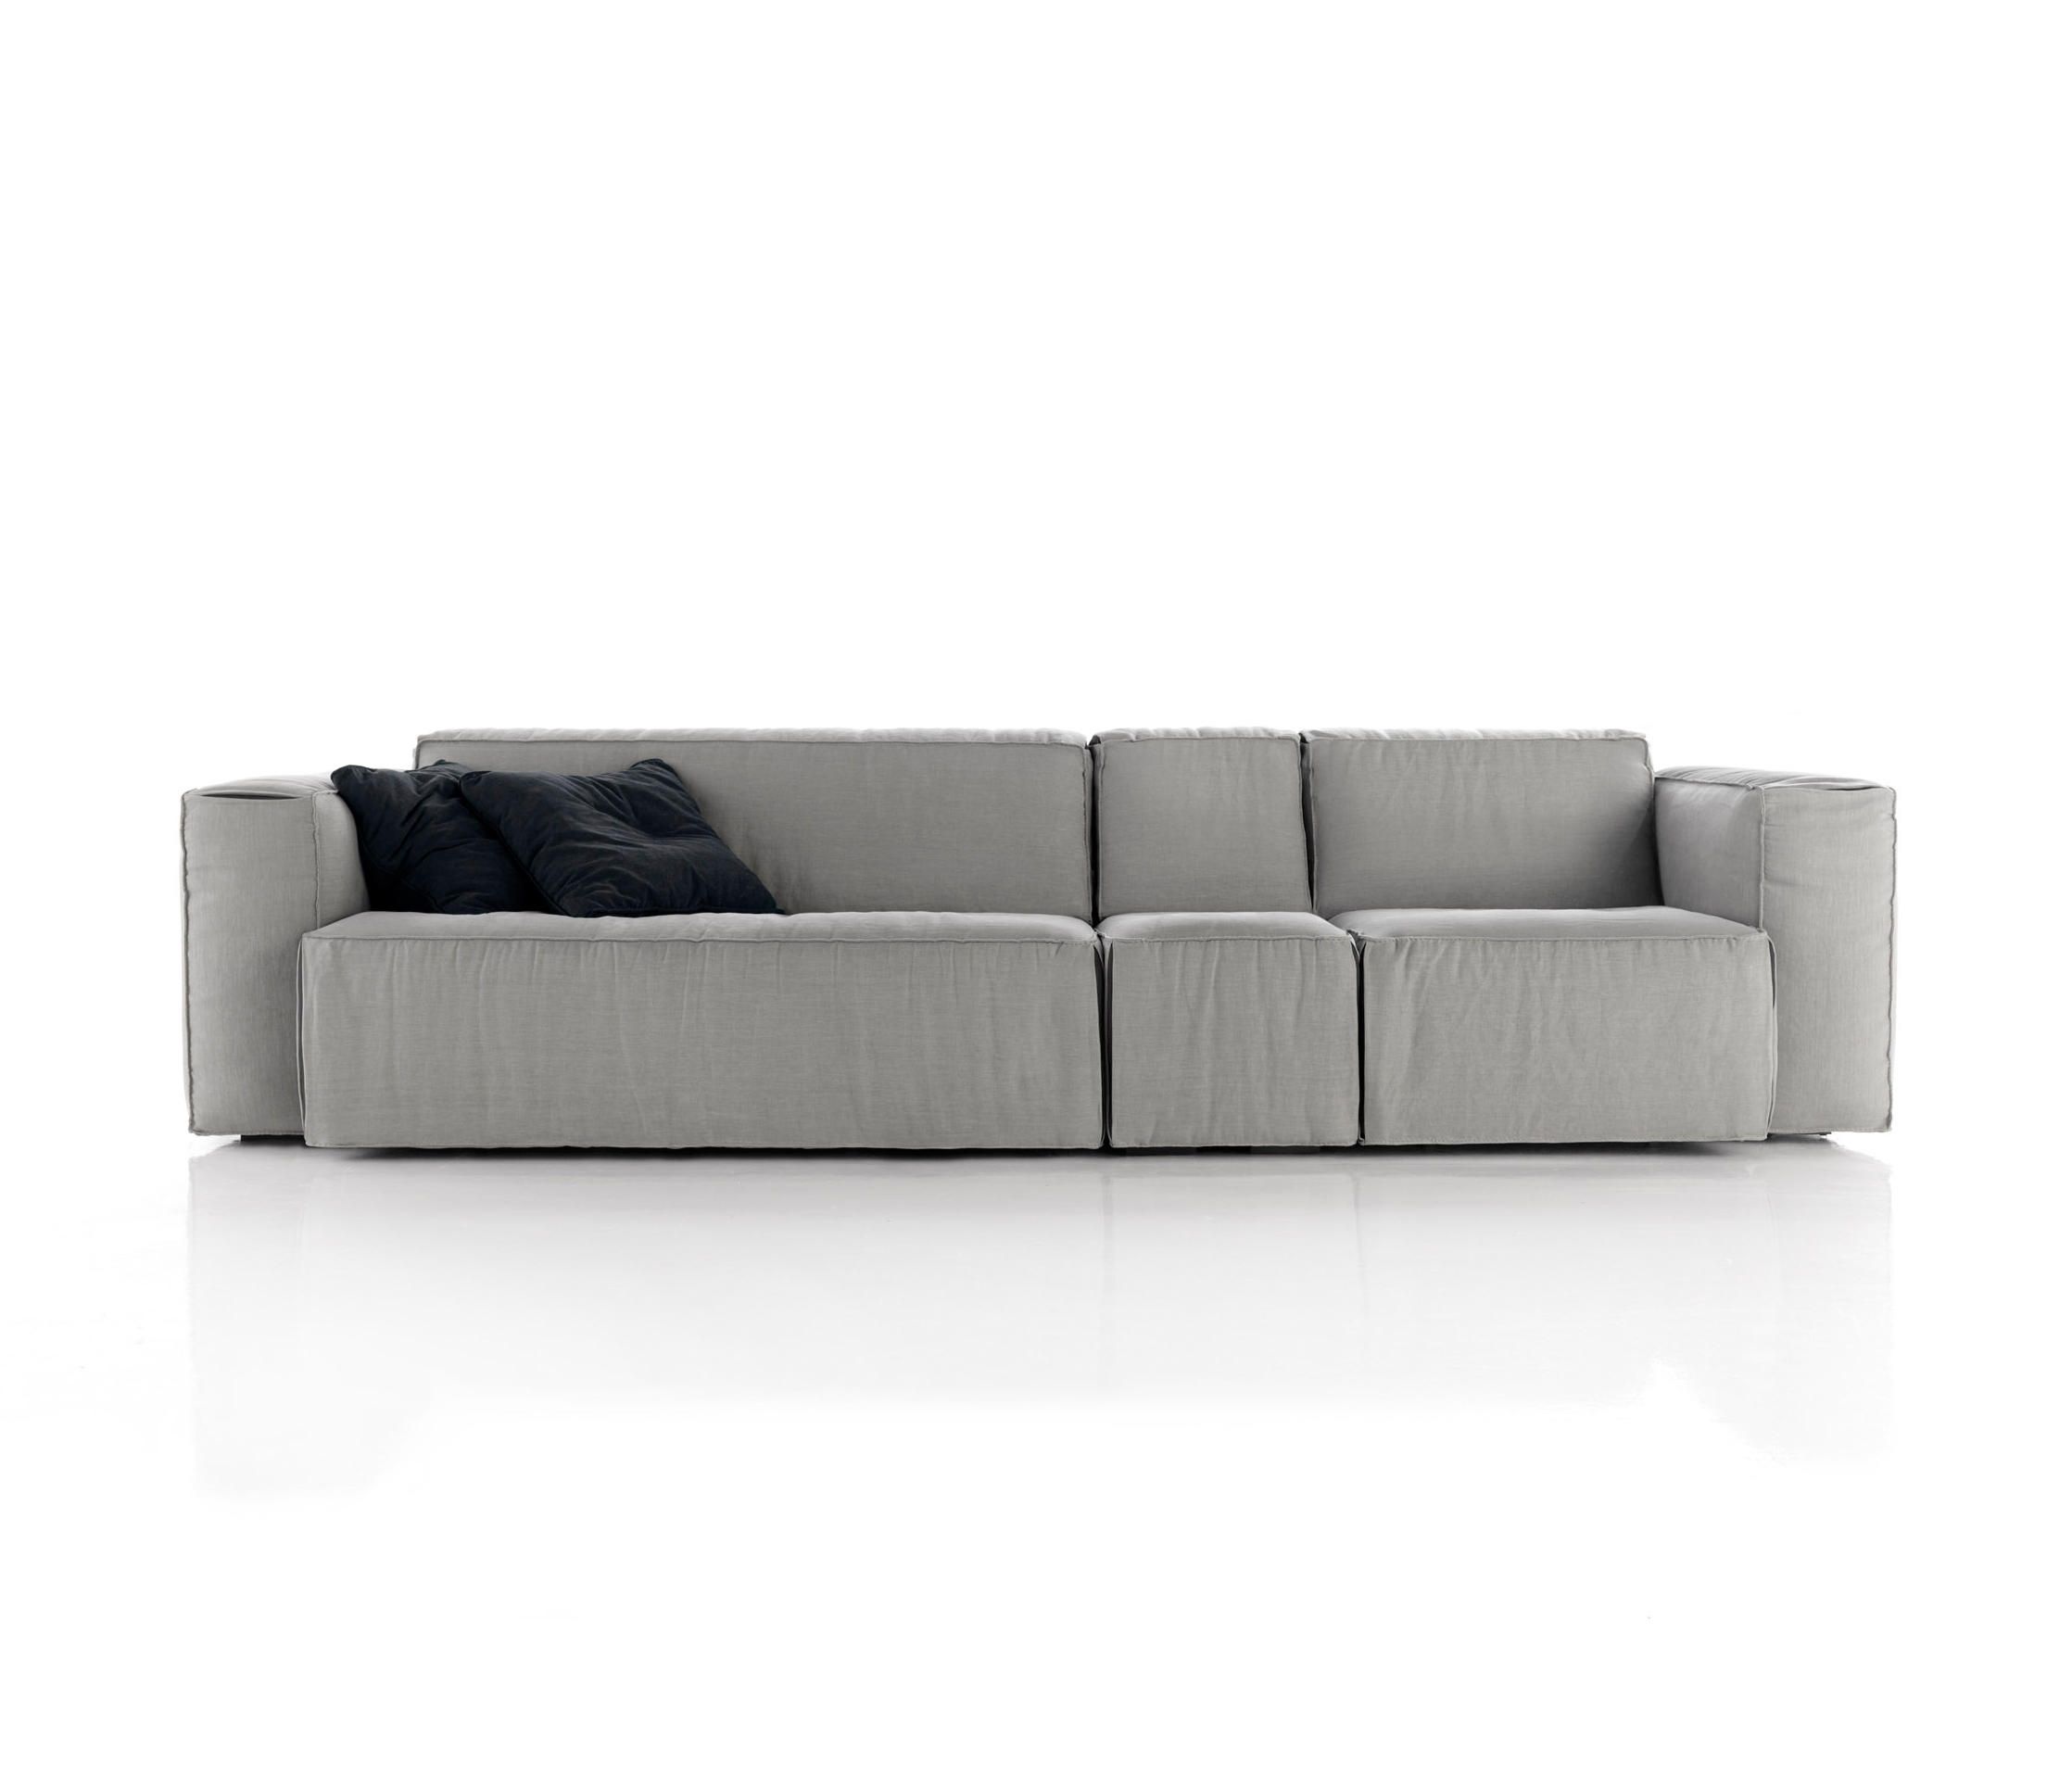 Soft Sofa – Lounge Sofas From Koo International | Architonic With Regard To Soft Sofas (View 6 of 10)